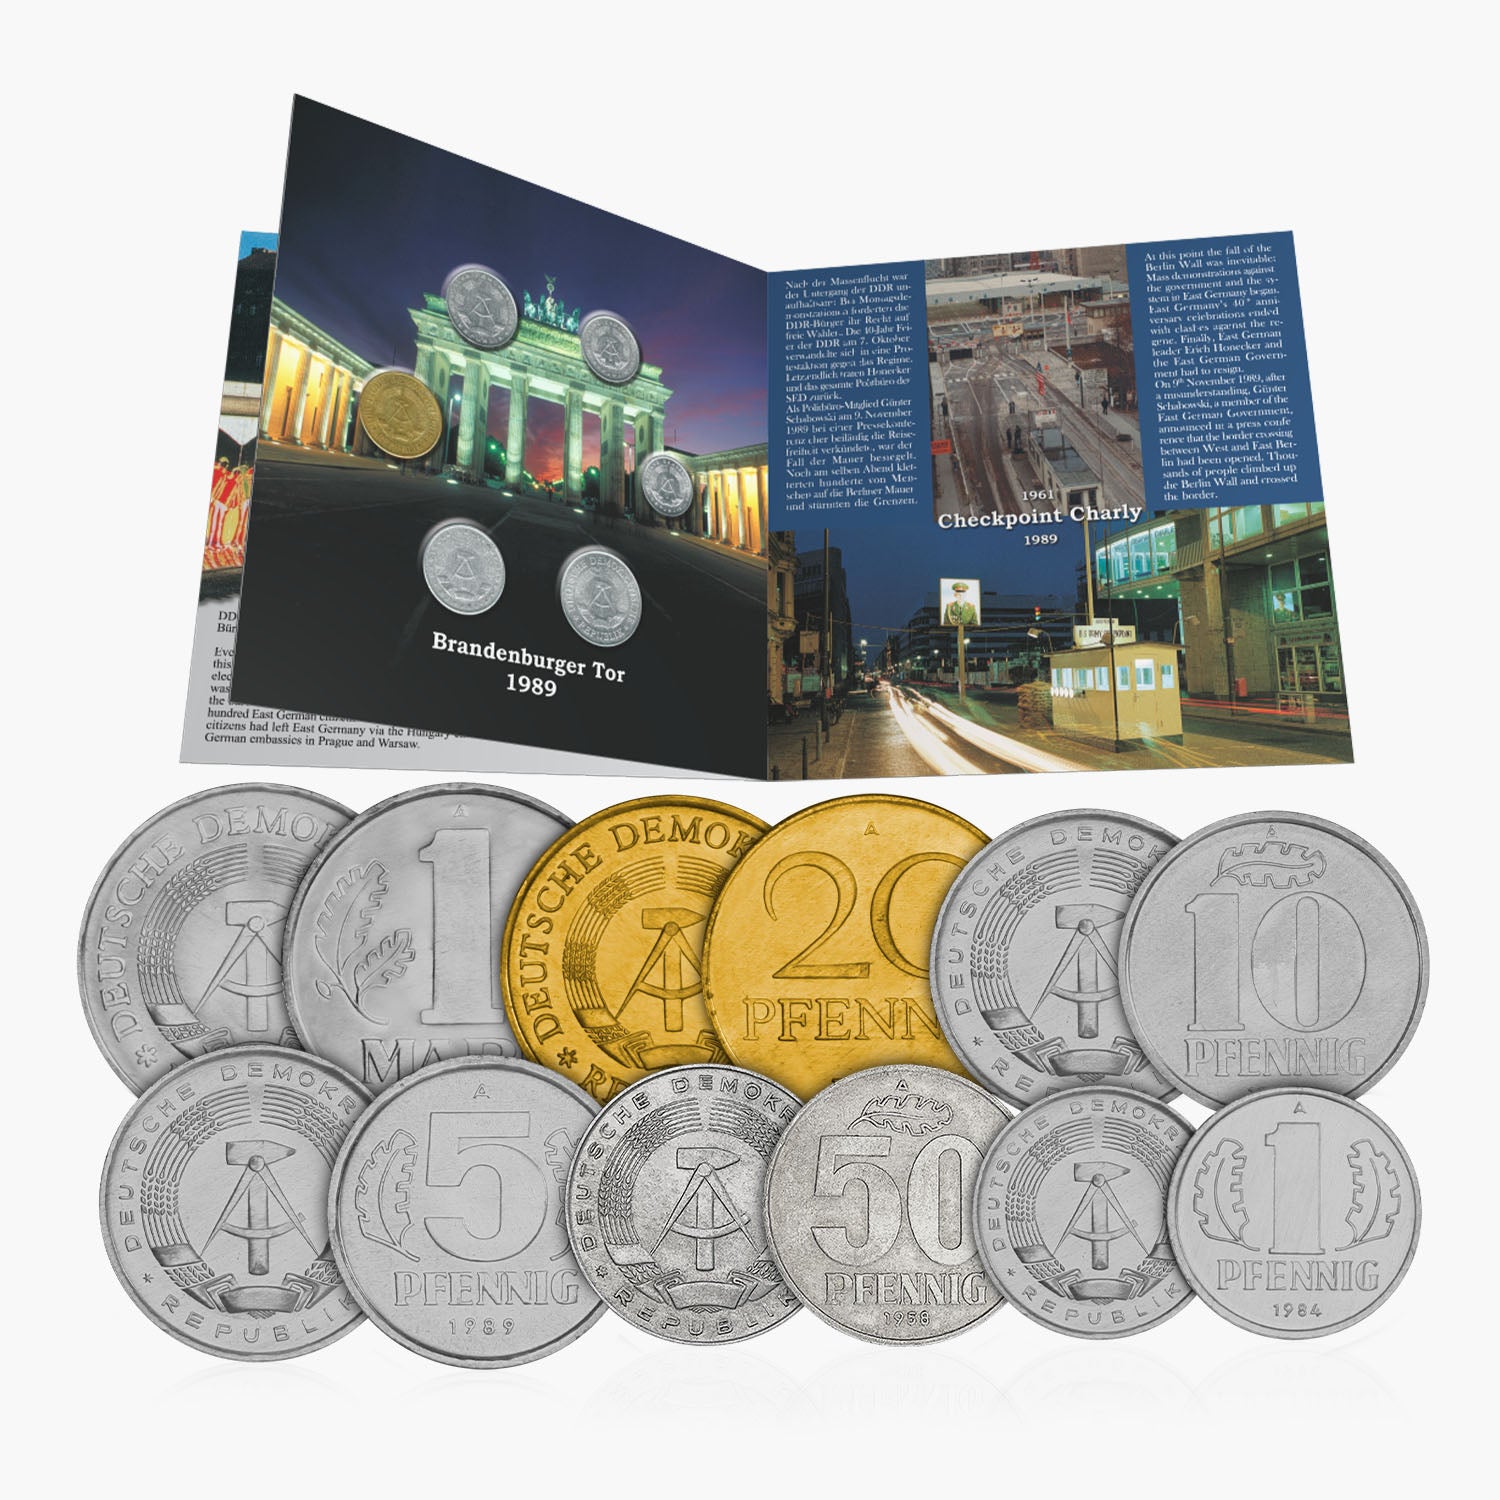 The Fall of the Berlin Wall coin and wall piece collection